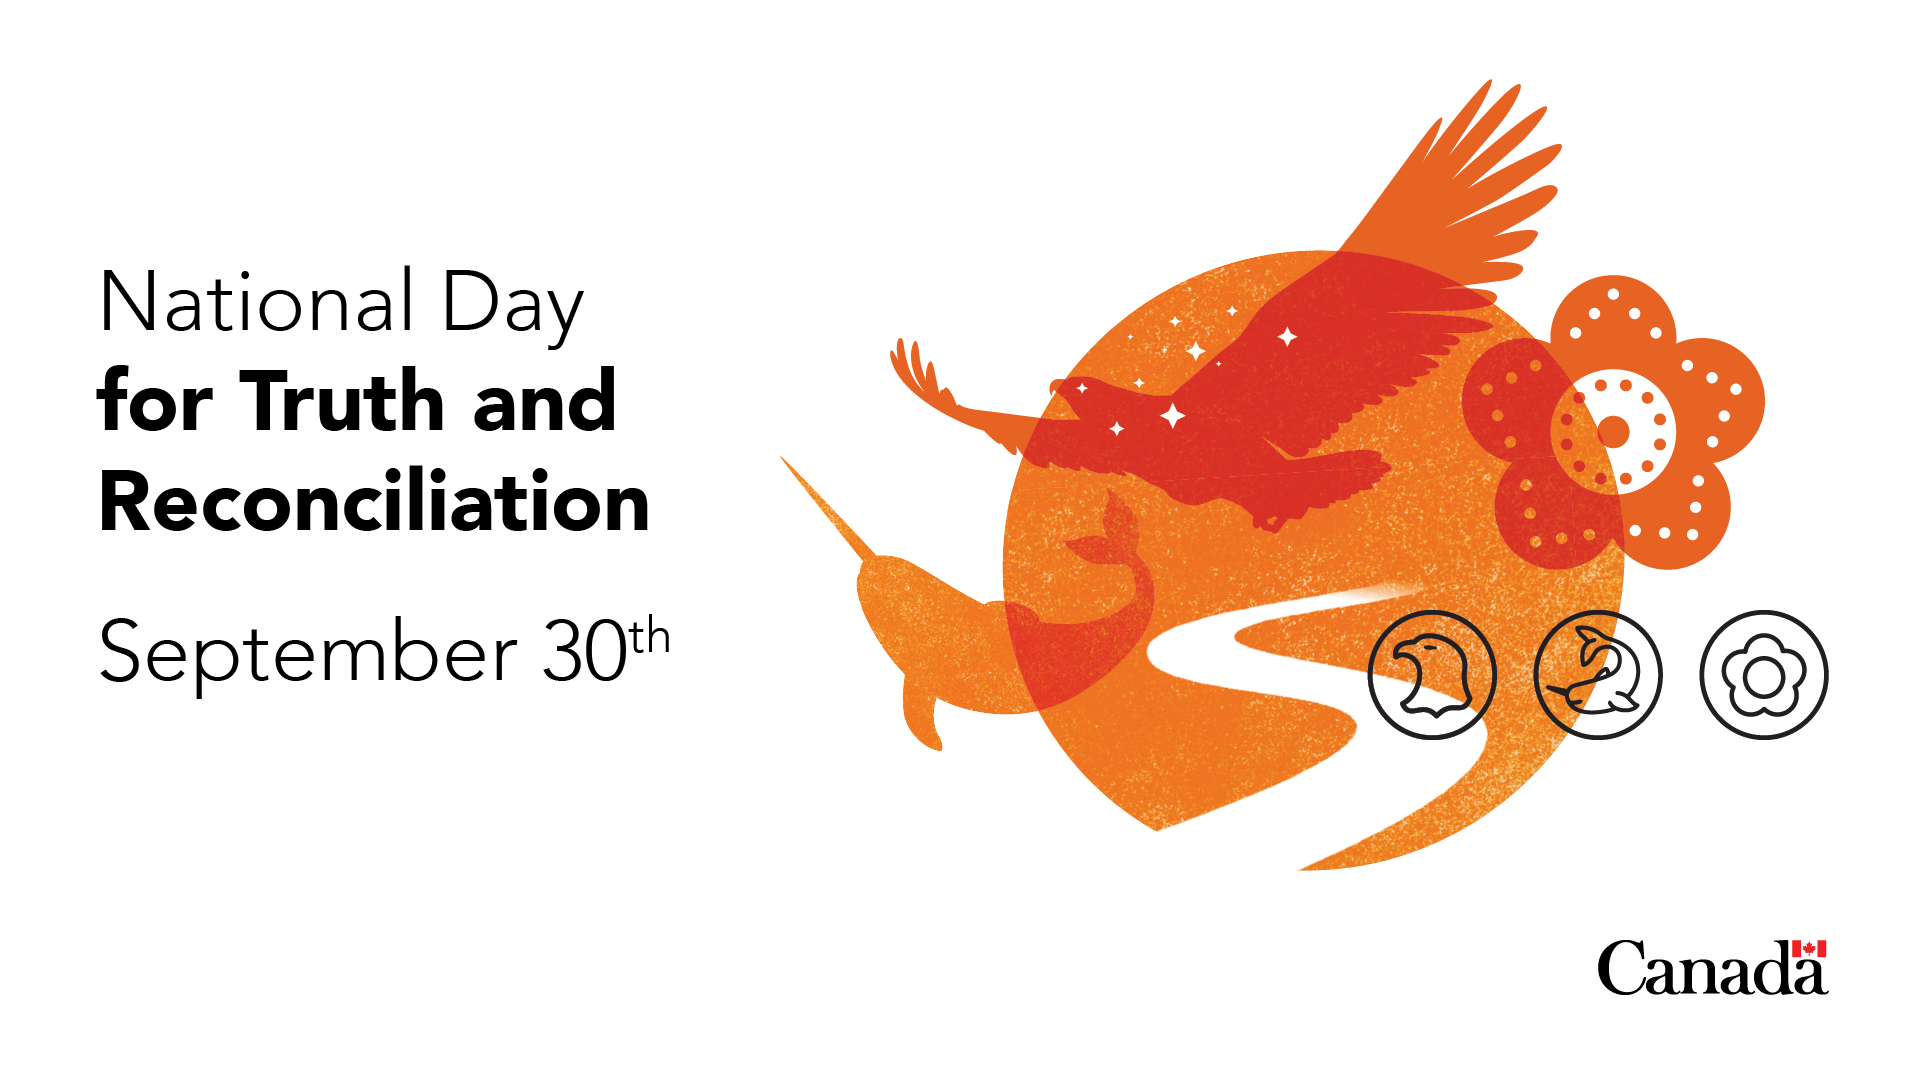 And orange and white graphic from the Government of Canada with imagery of animals & elements connecting with one another. It reads "National Day for Truth & Reconciliation, September 30th"